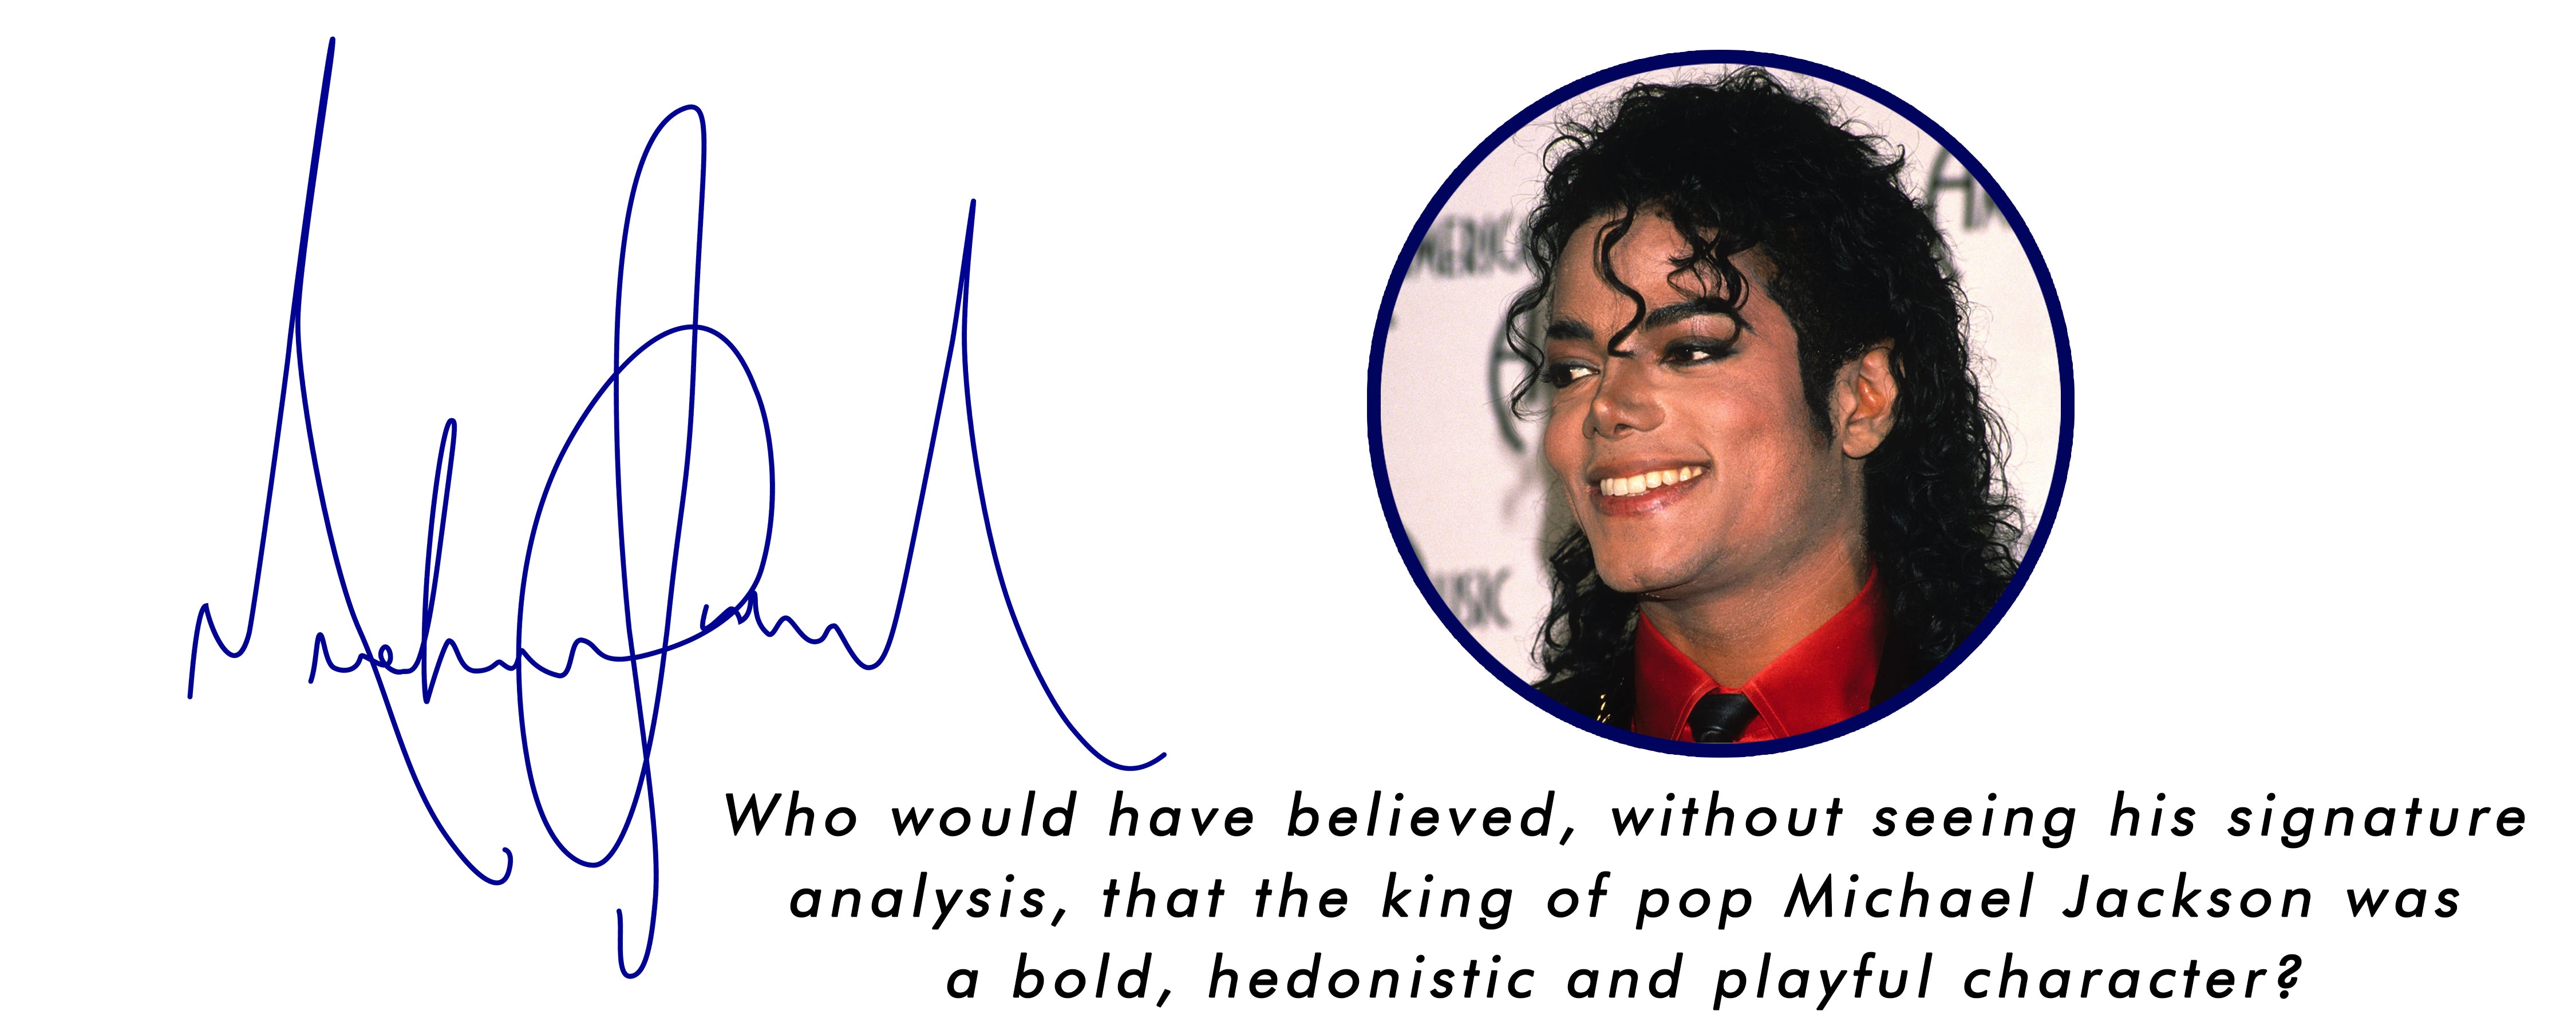 Who would have believed, without seeing his signature analysis, that the king of pop Michael Jackson was a bold, hedonistic and playful character?